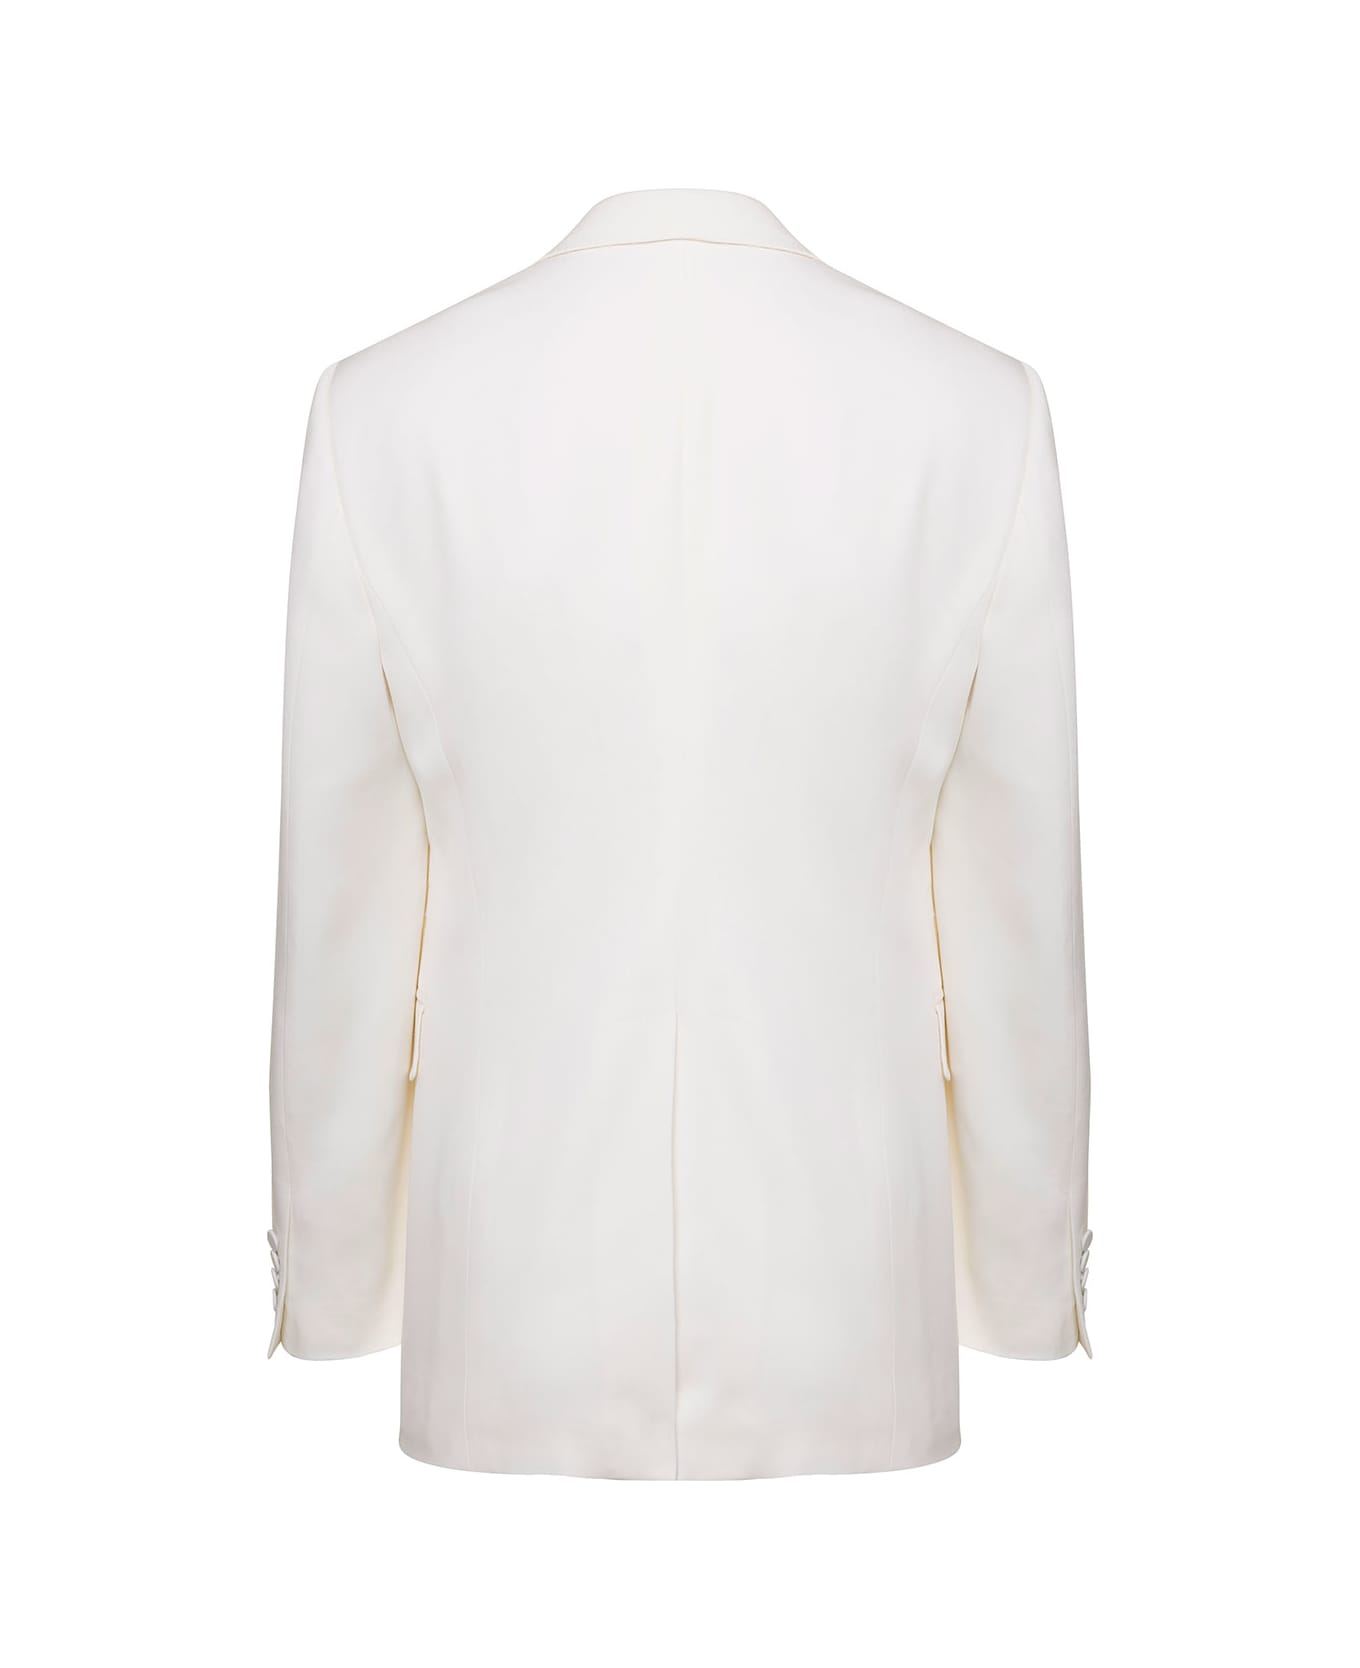 Alexander McQueen White Single-breasted Jacket With Notched Revers In Wool Woman - White ブレザー